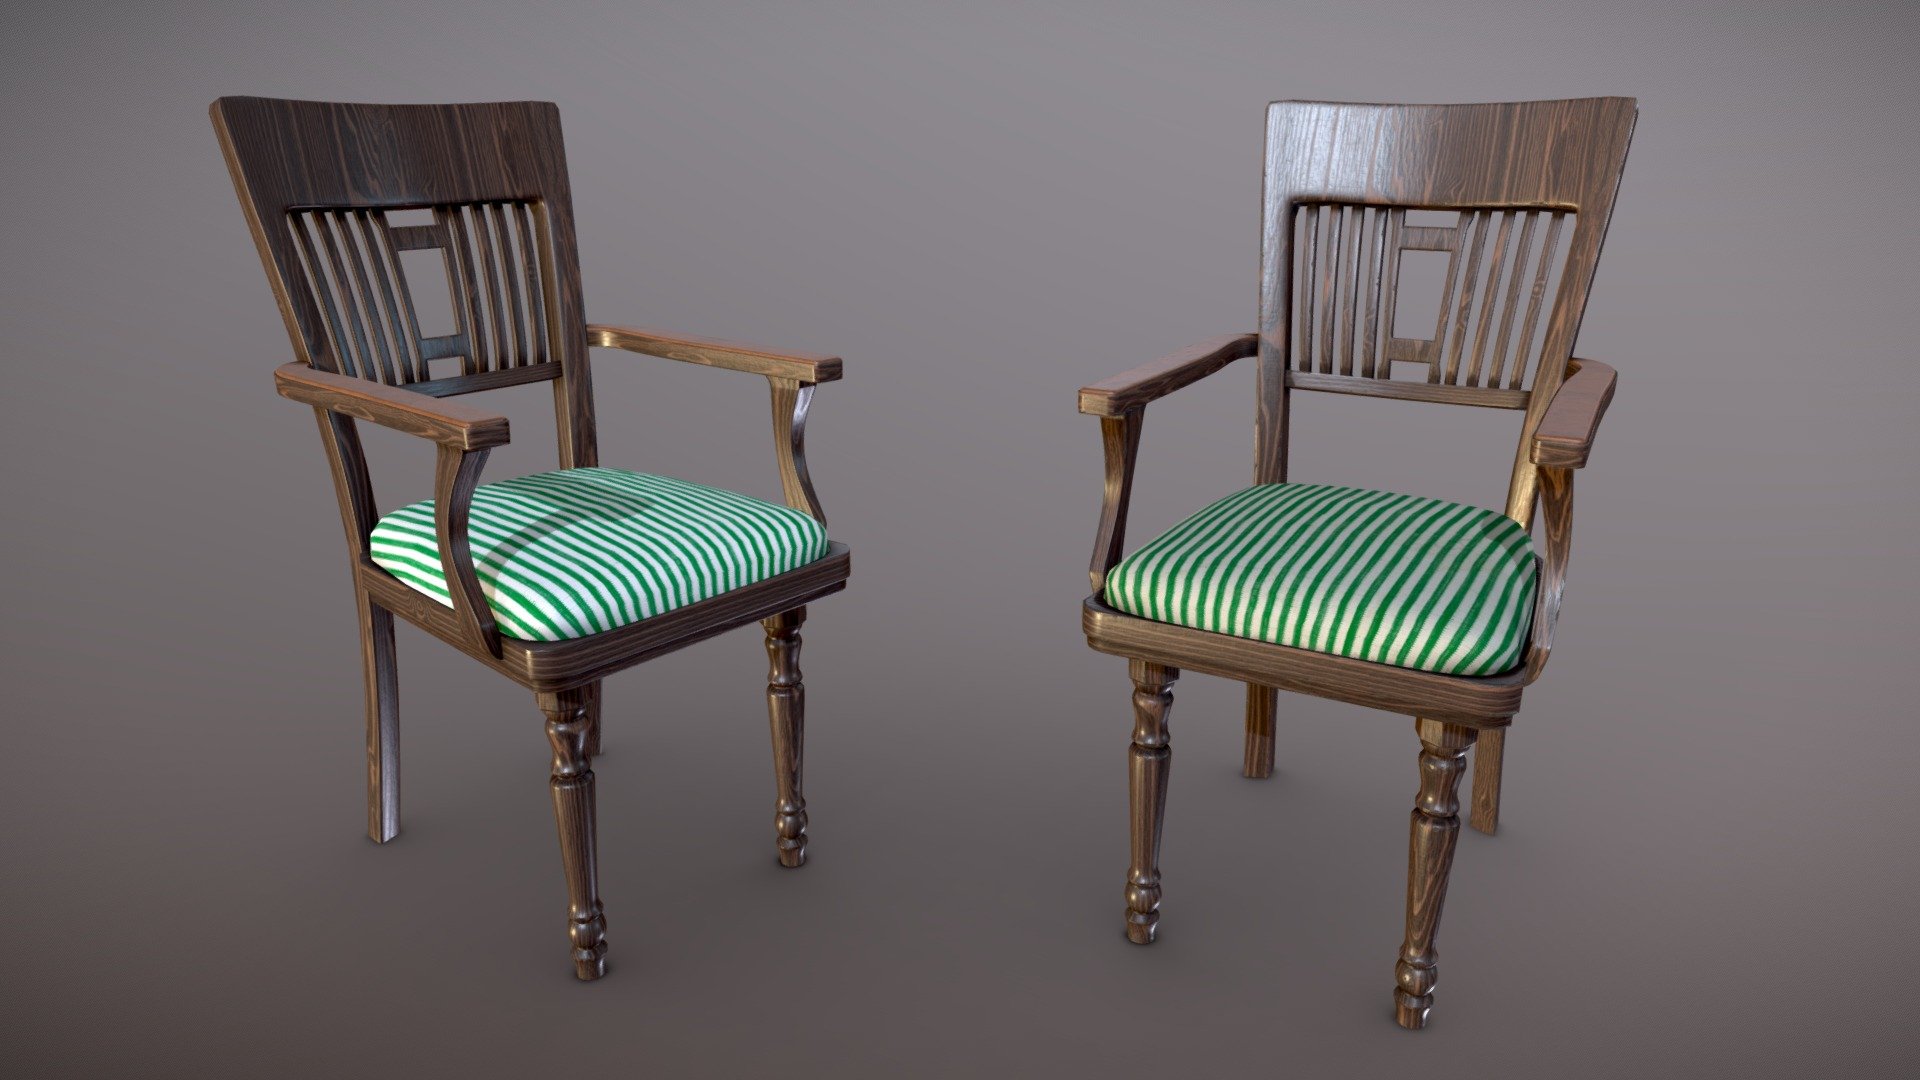 Realistic Vintage Chair with High Quality PBR Textures.

Blend, FBX, UnityPackages (2019.4, Built-In/URP/HDRP) formats.

Materials and textures included.

Metallic/Roughness PBR, Unity Built-In/URP/HDRP and UE4 Texture Sets Dirty and Clean 4096px PNG 8Bit Textures.

Model by @Bek, Idea and Art Direction by Me - Vintage Chair (Clean and Dirty) - 3D model by Valday Team (@mrven) 3d model